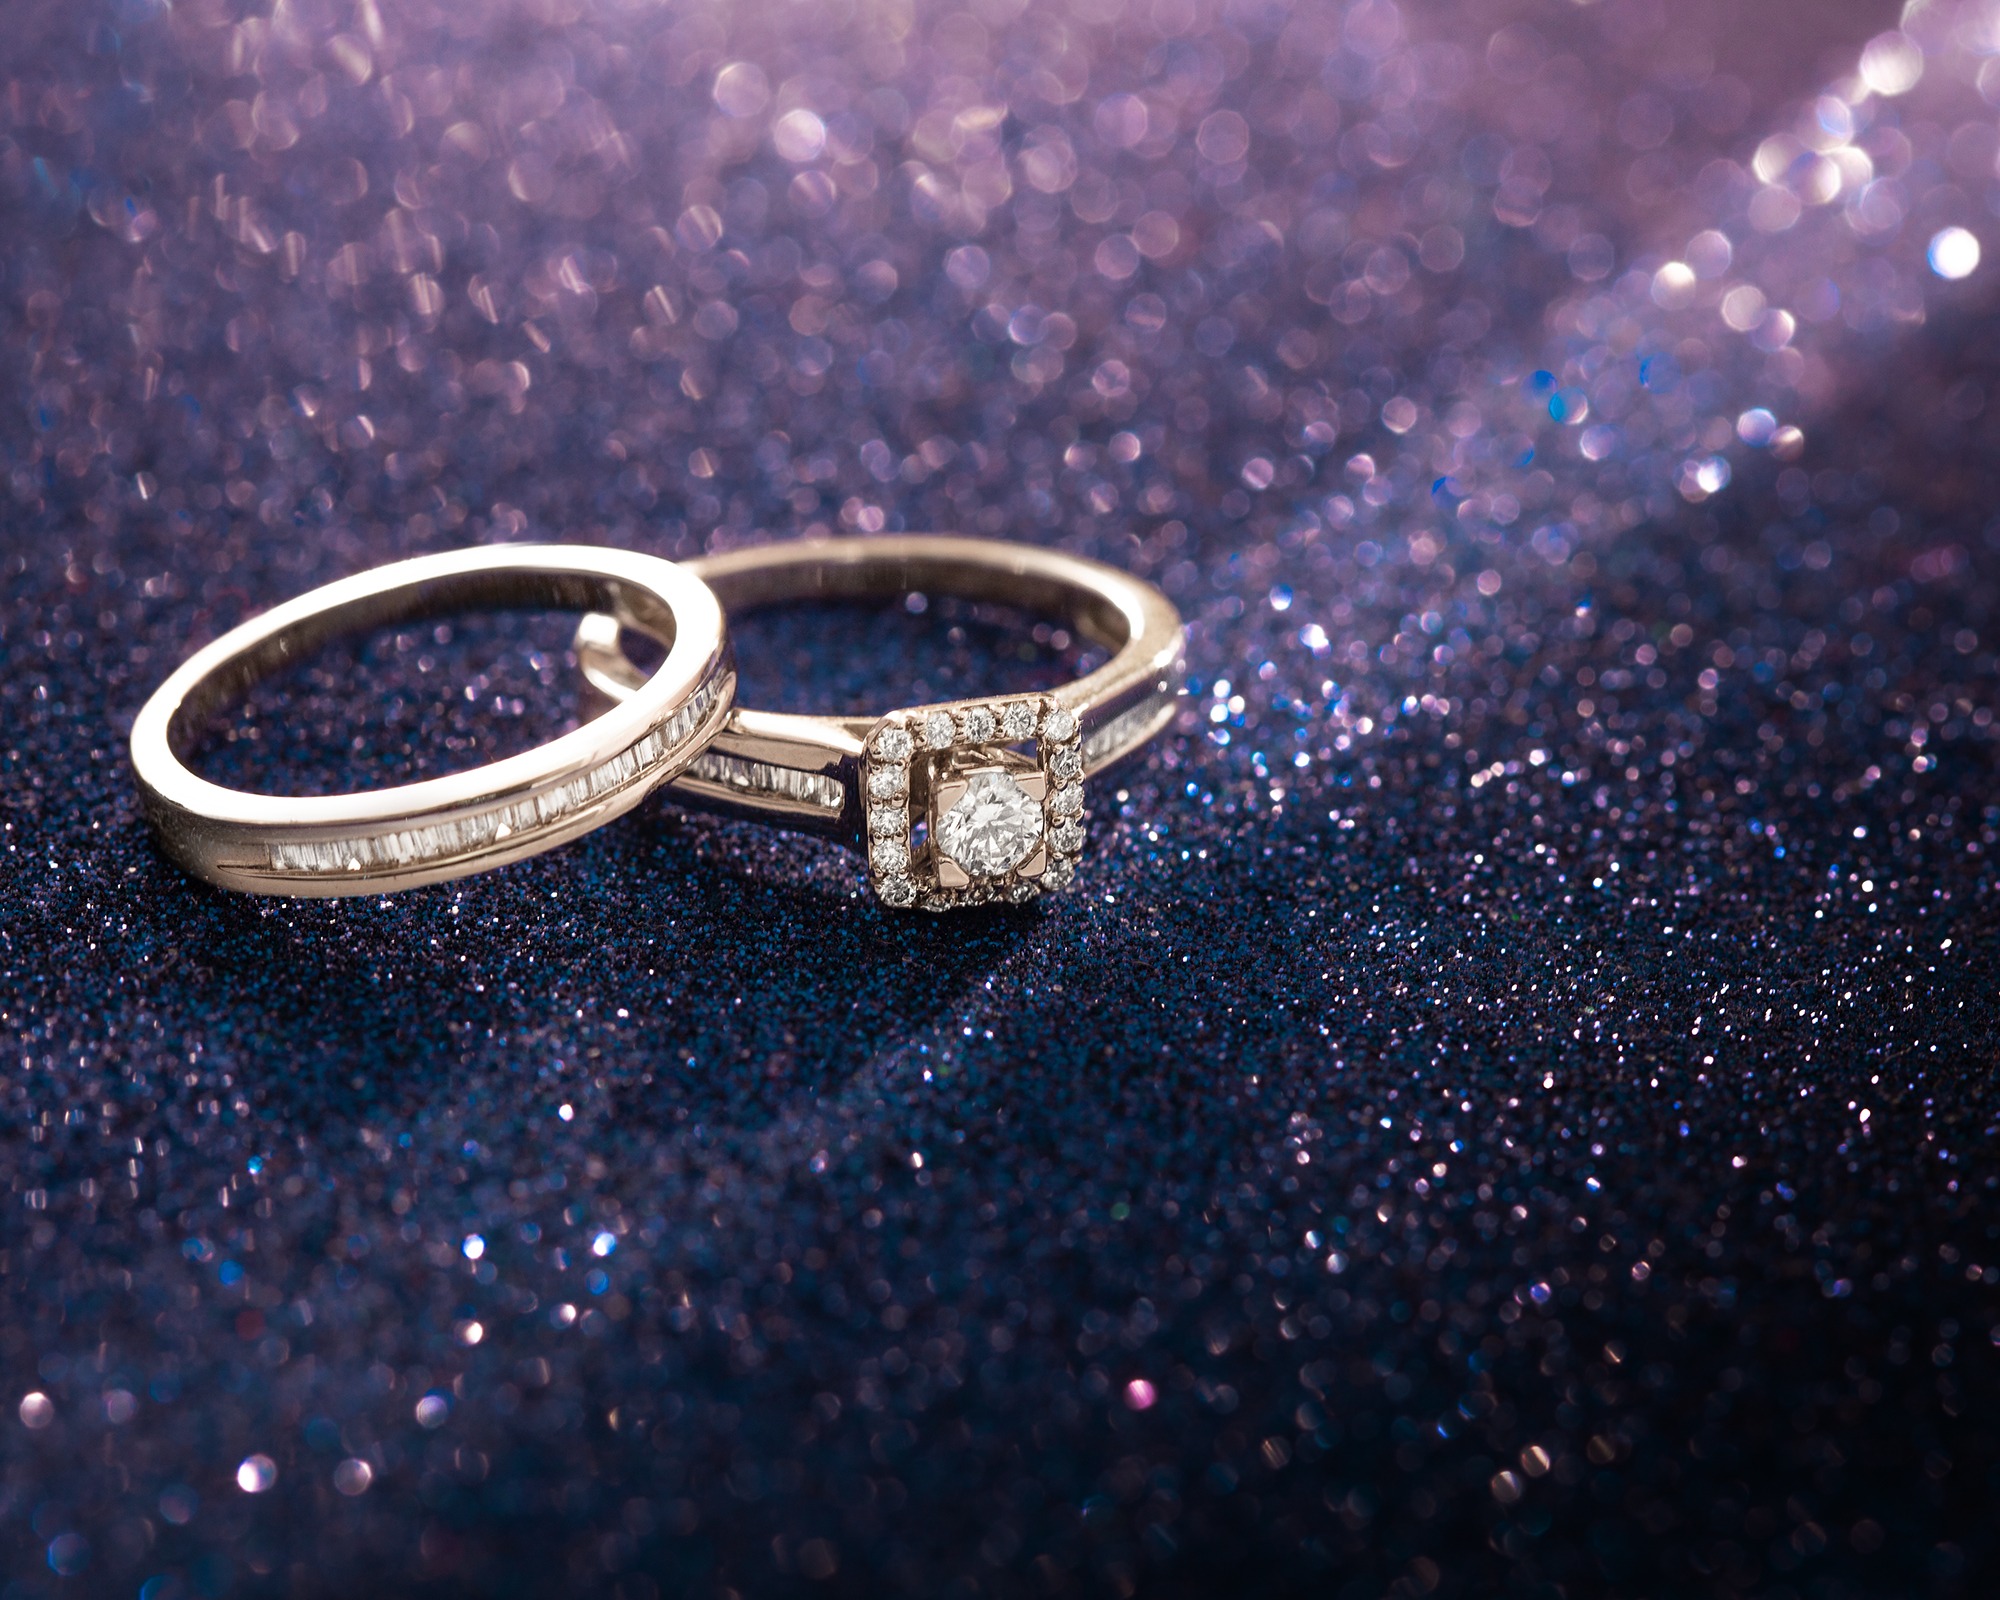 How To Care for Your Engagement Ring - The Caratlane